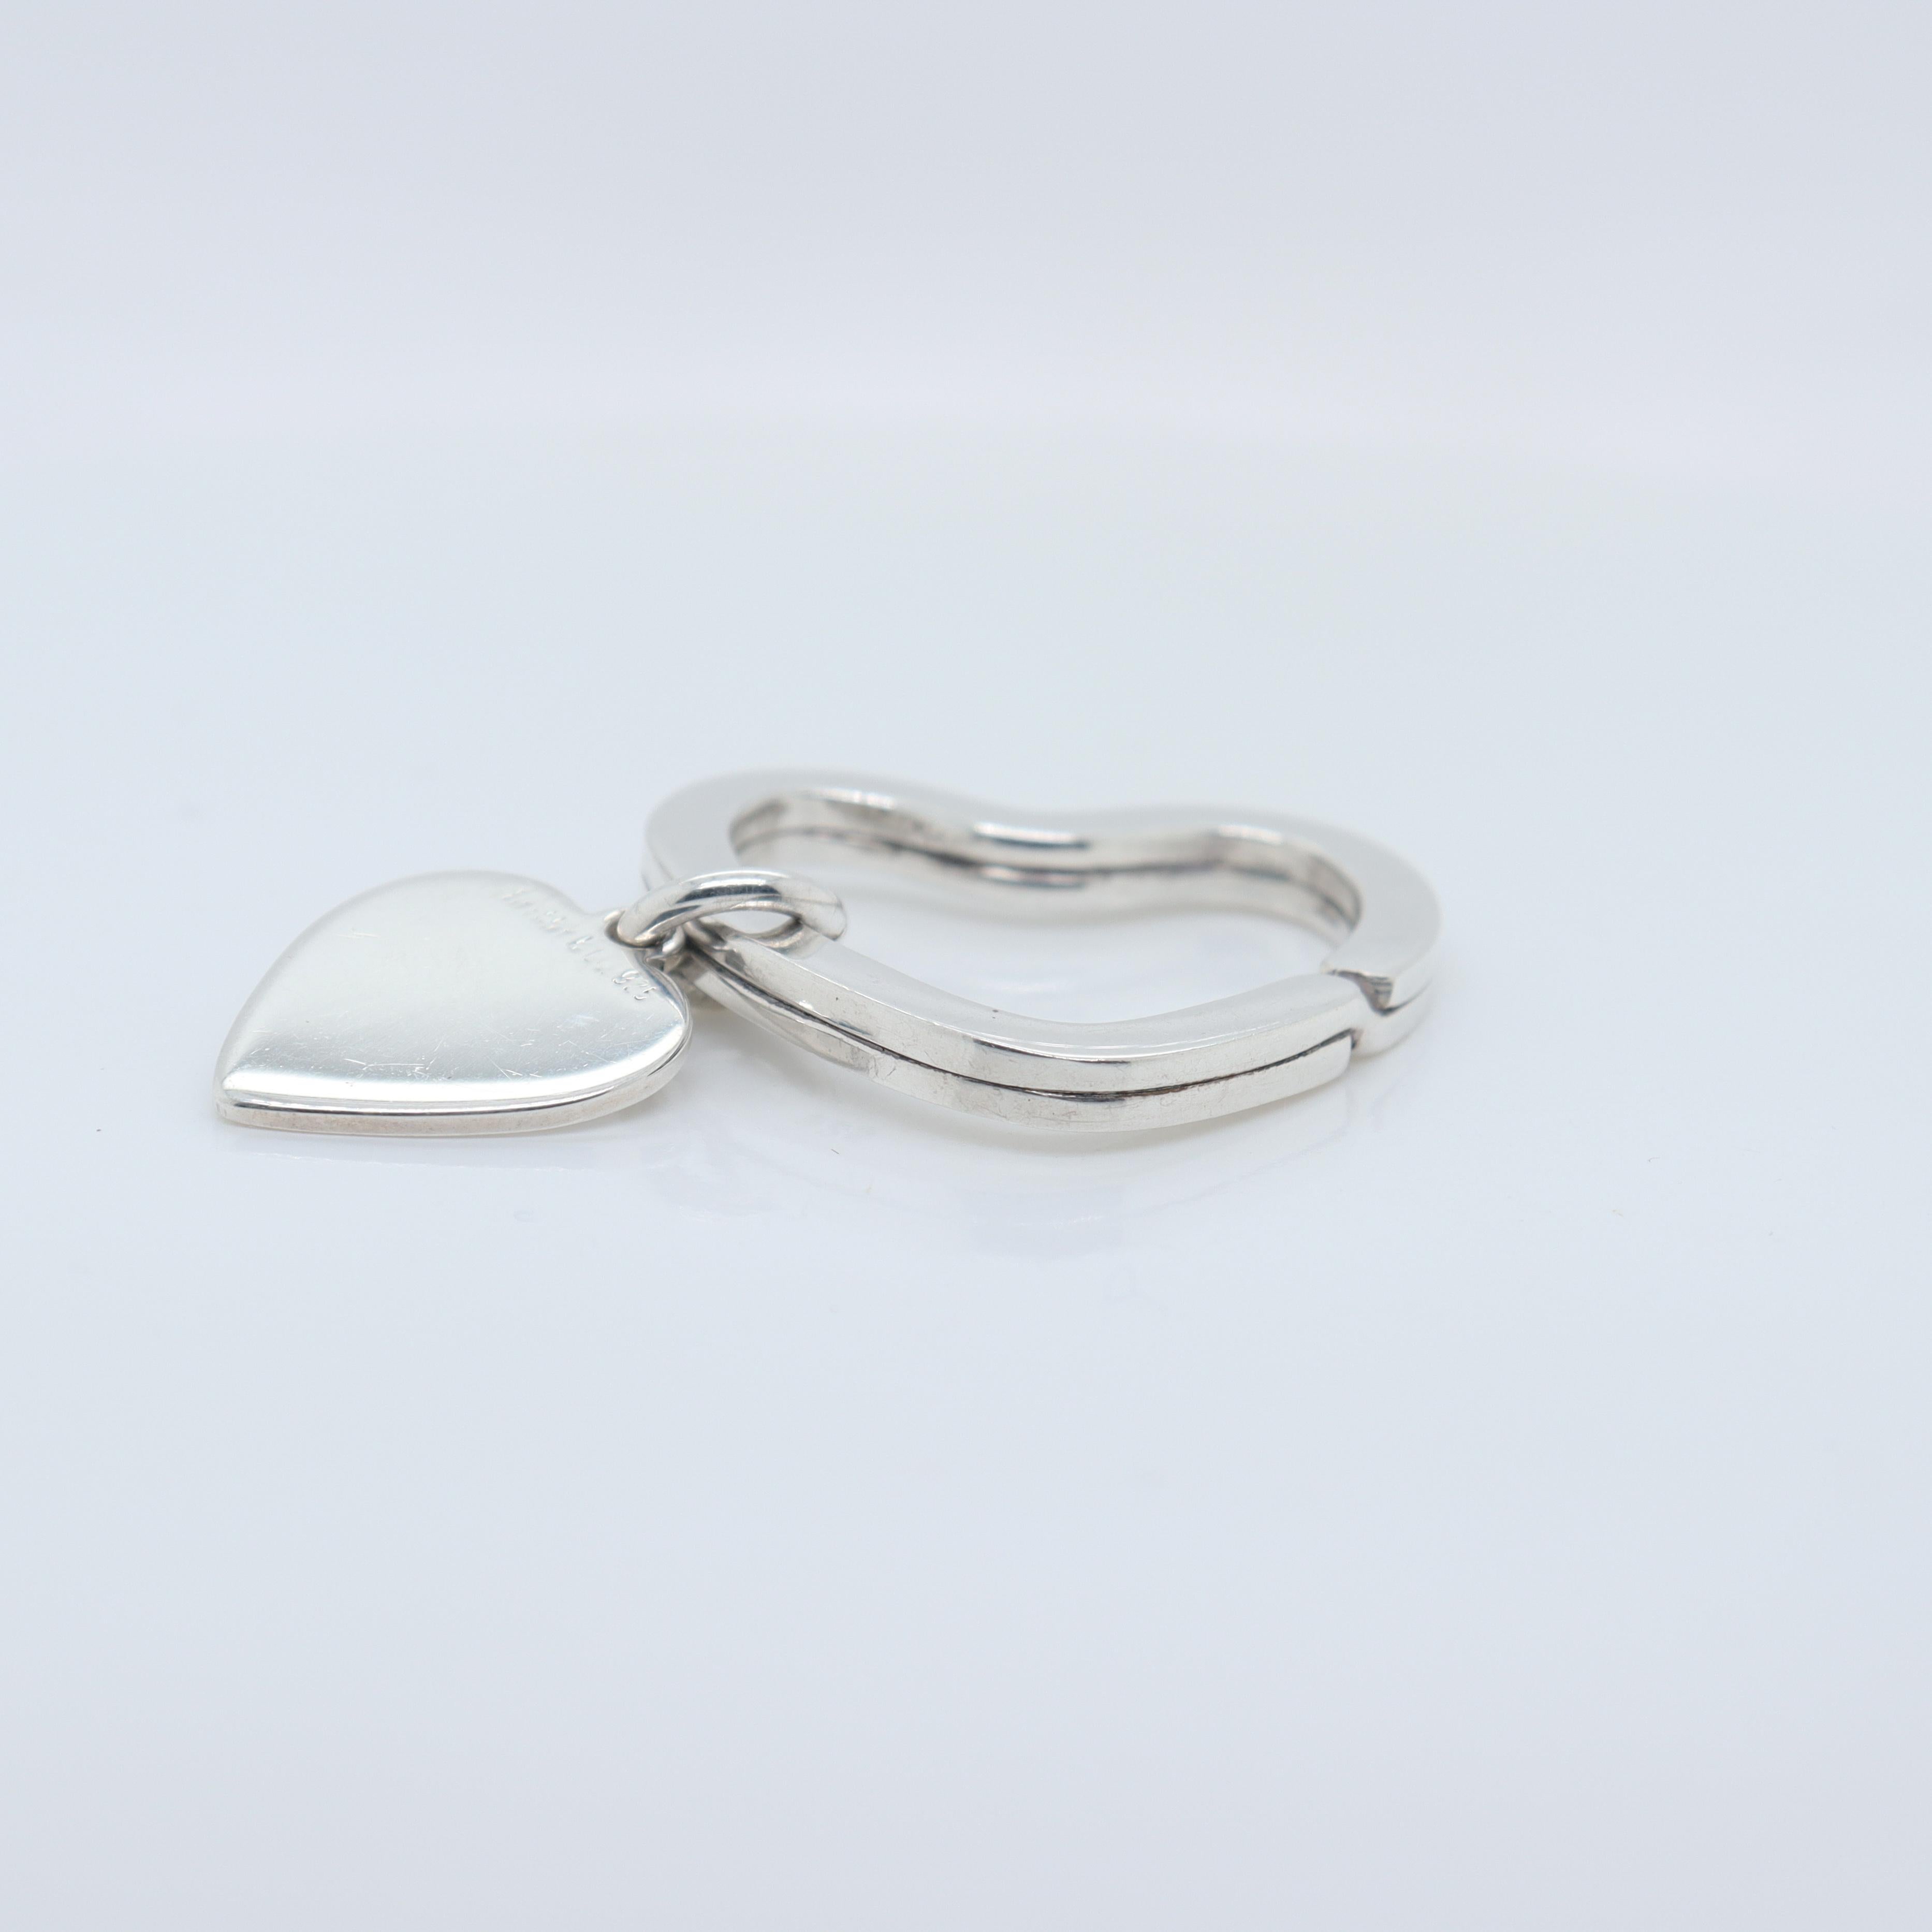 Tiffany & Co. Sterling Silver Heart Shaped Key Holder or Ring In Good Condition For Sale In Philadelphia, PA